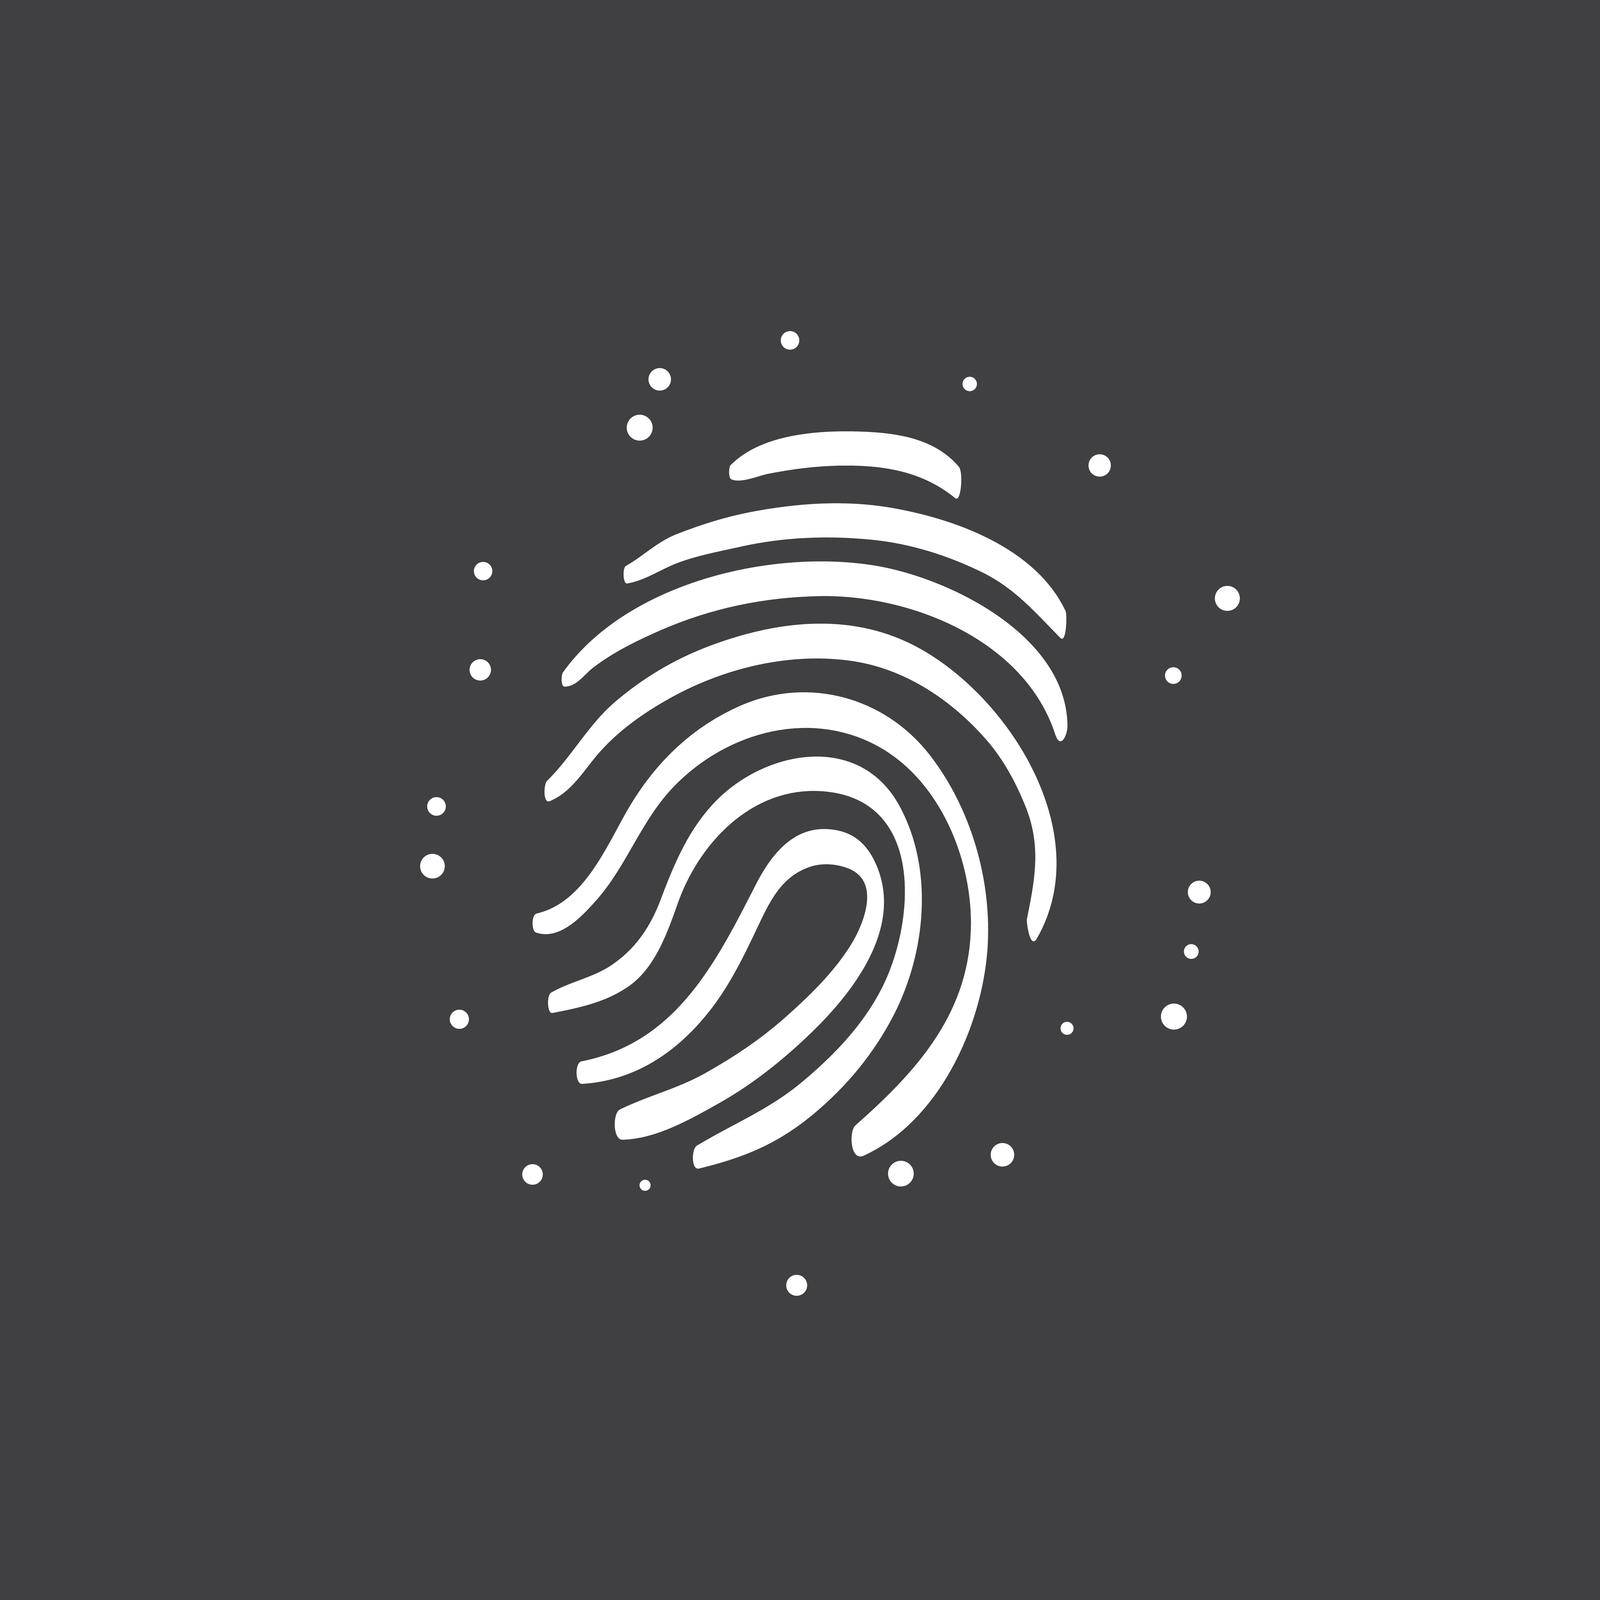 Fingerprint icon in doodle sketch lines. Science security crime anatomy identity